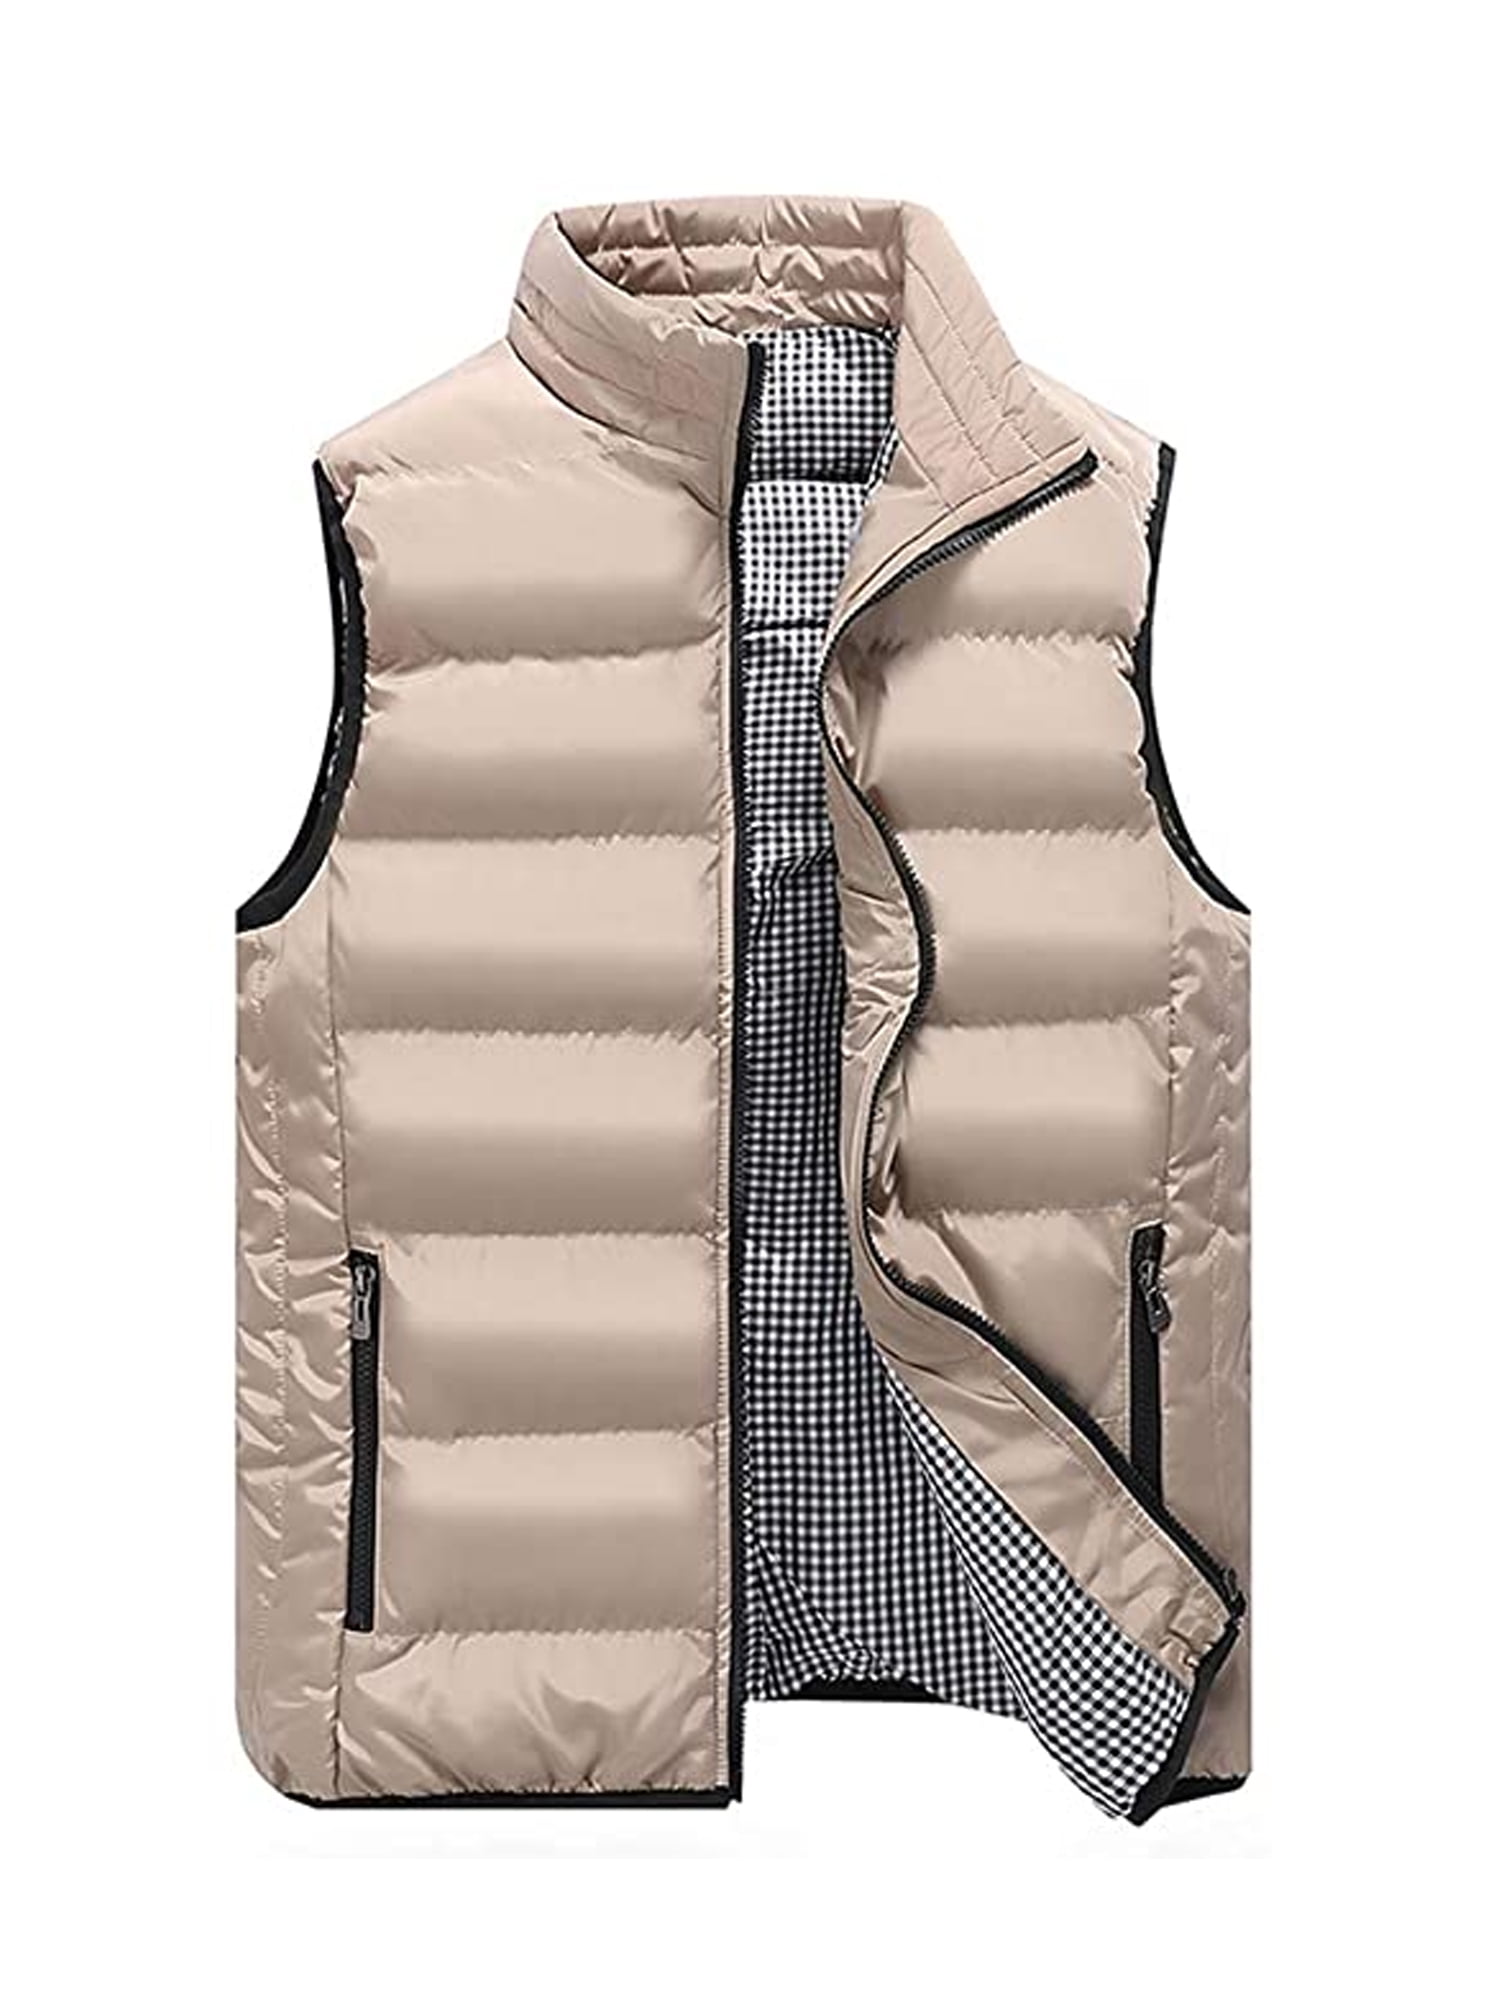 Mens Quilted Sleeveless Fishing Bodywarmer Winter Gilet Multi Pockets Size M-4XL 